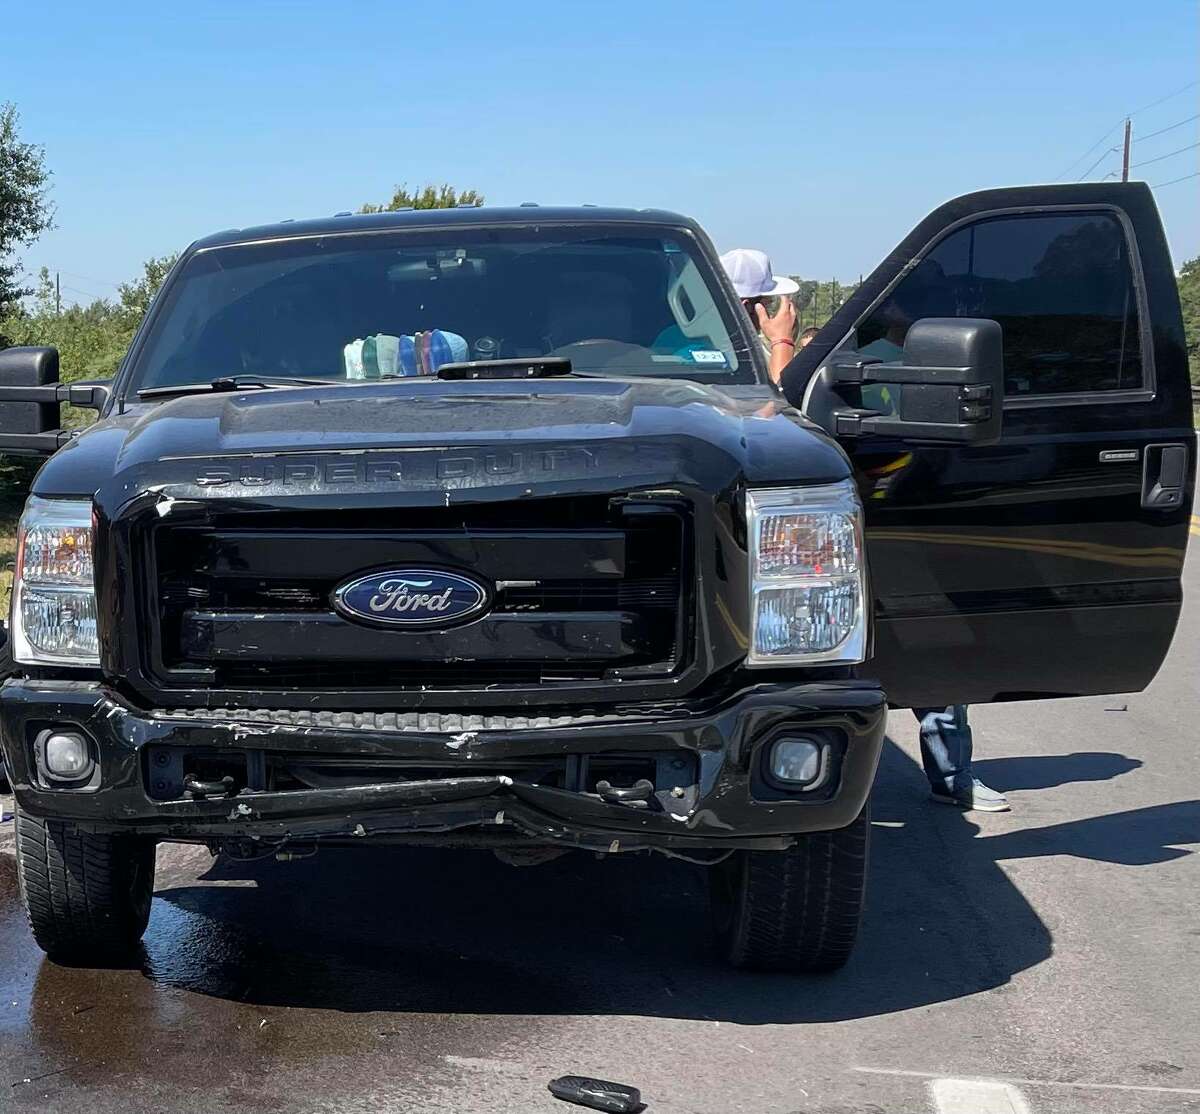 The force of the impact damaged the front end of the teenager's truck. 